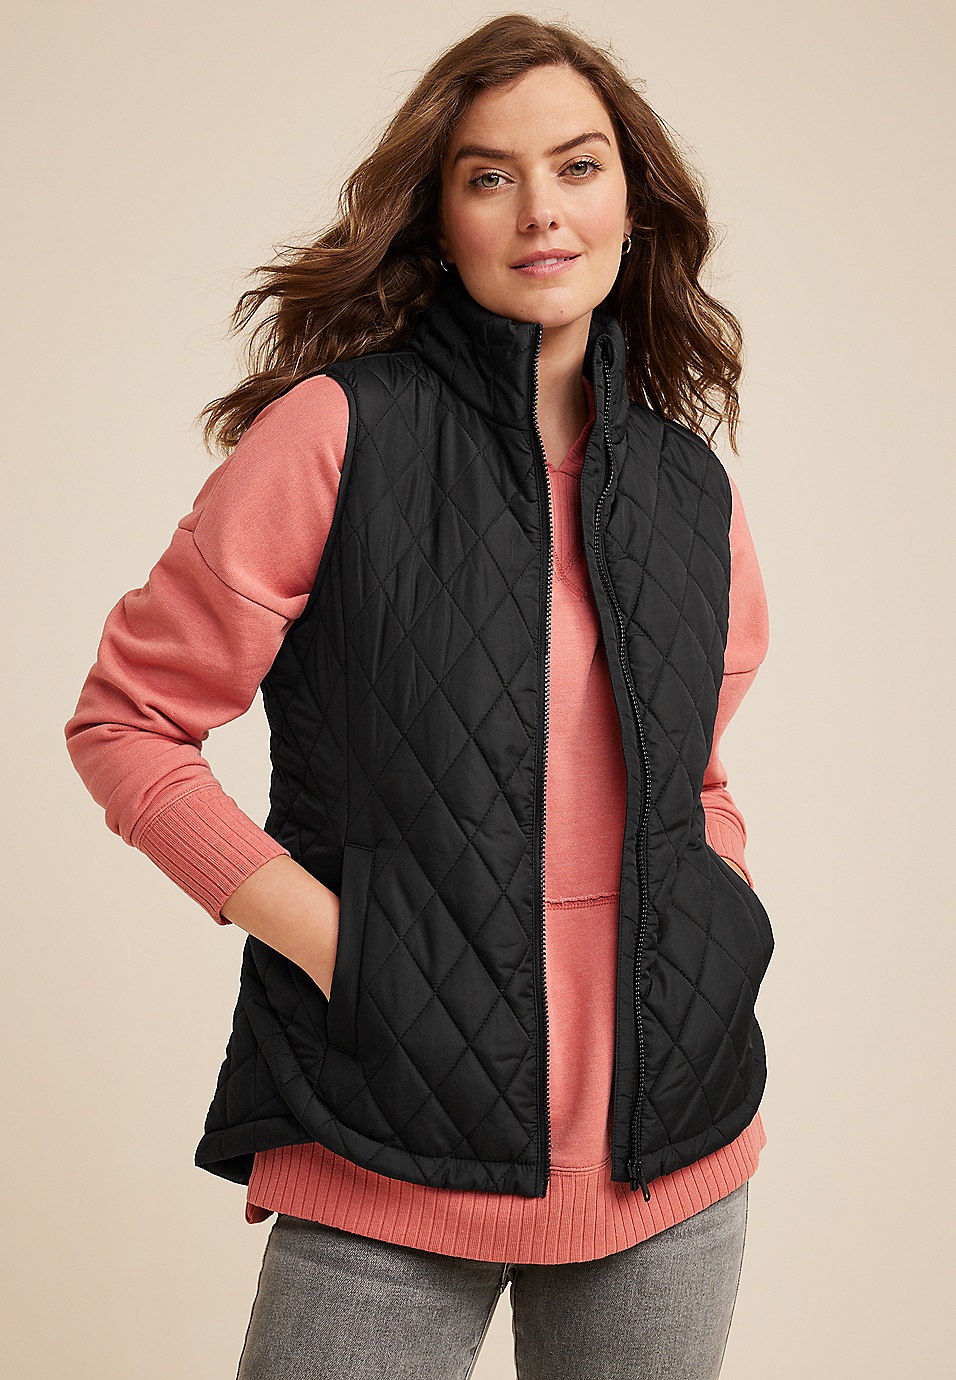 Maurices Women's Hooded Longline Puffer Coat